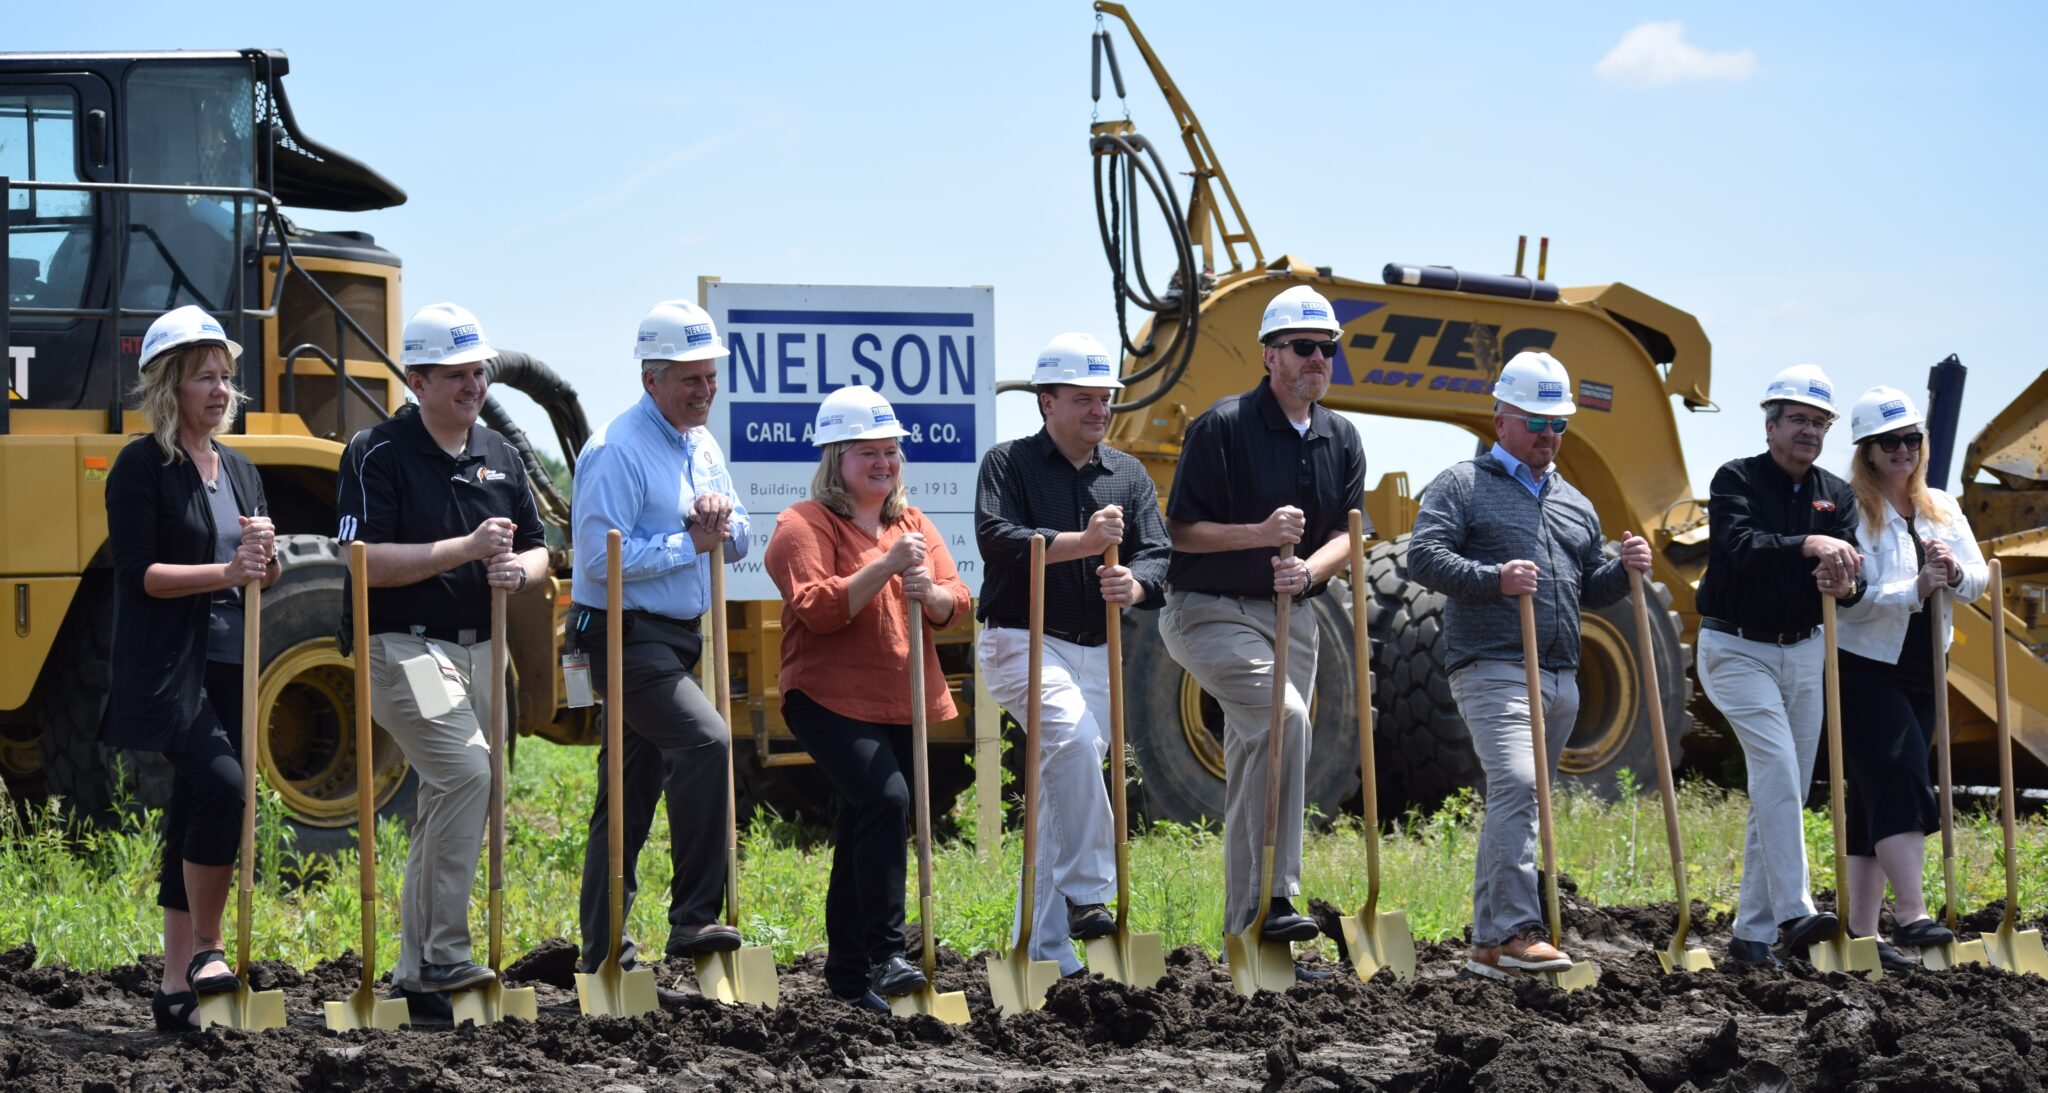 College Community Schools Hosts Official Groundbreaking to Celebrate